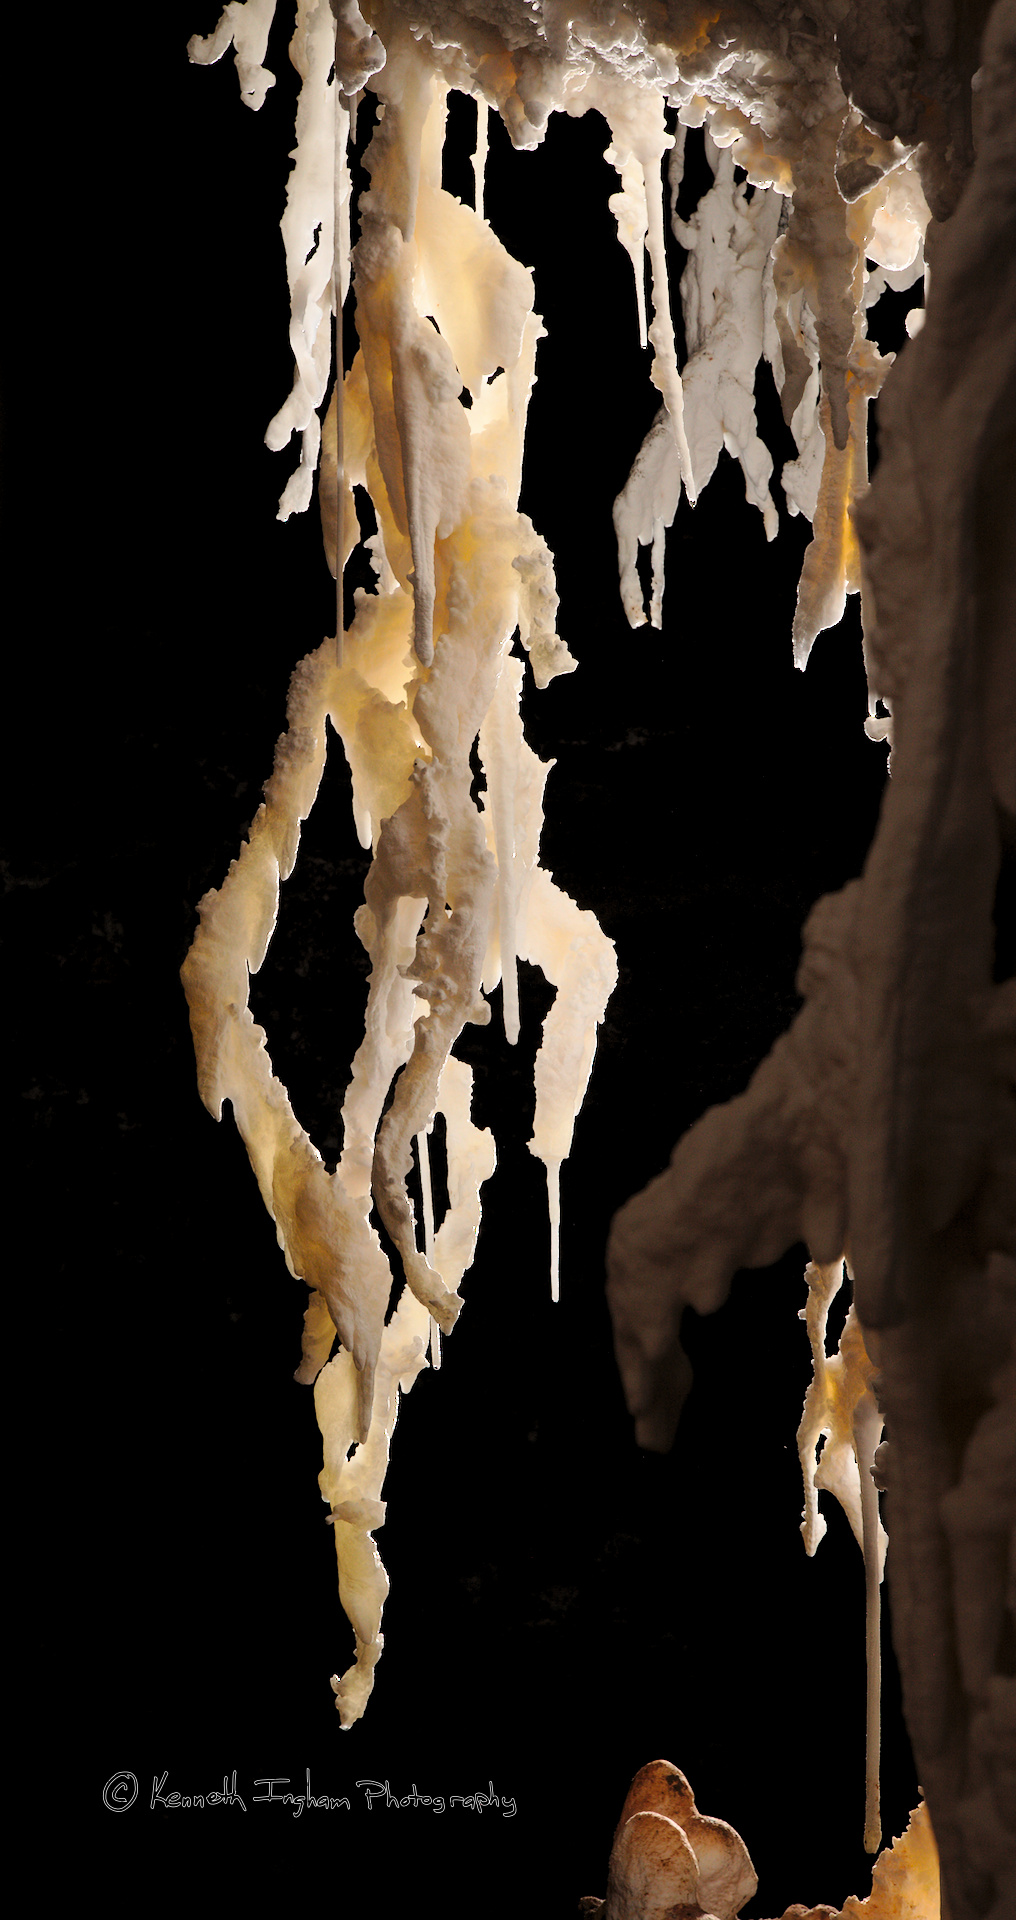 Cave formation